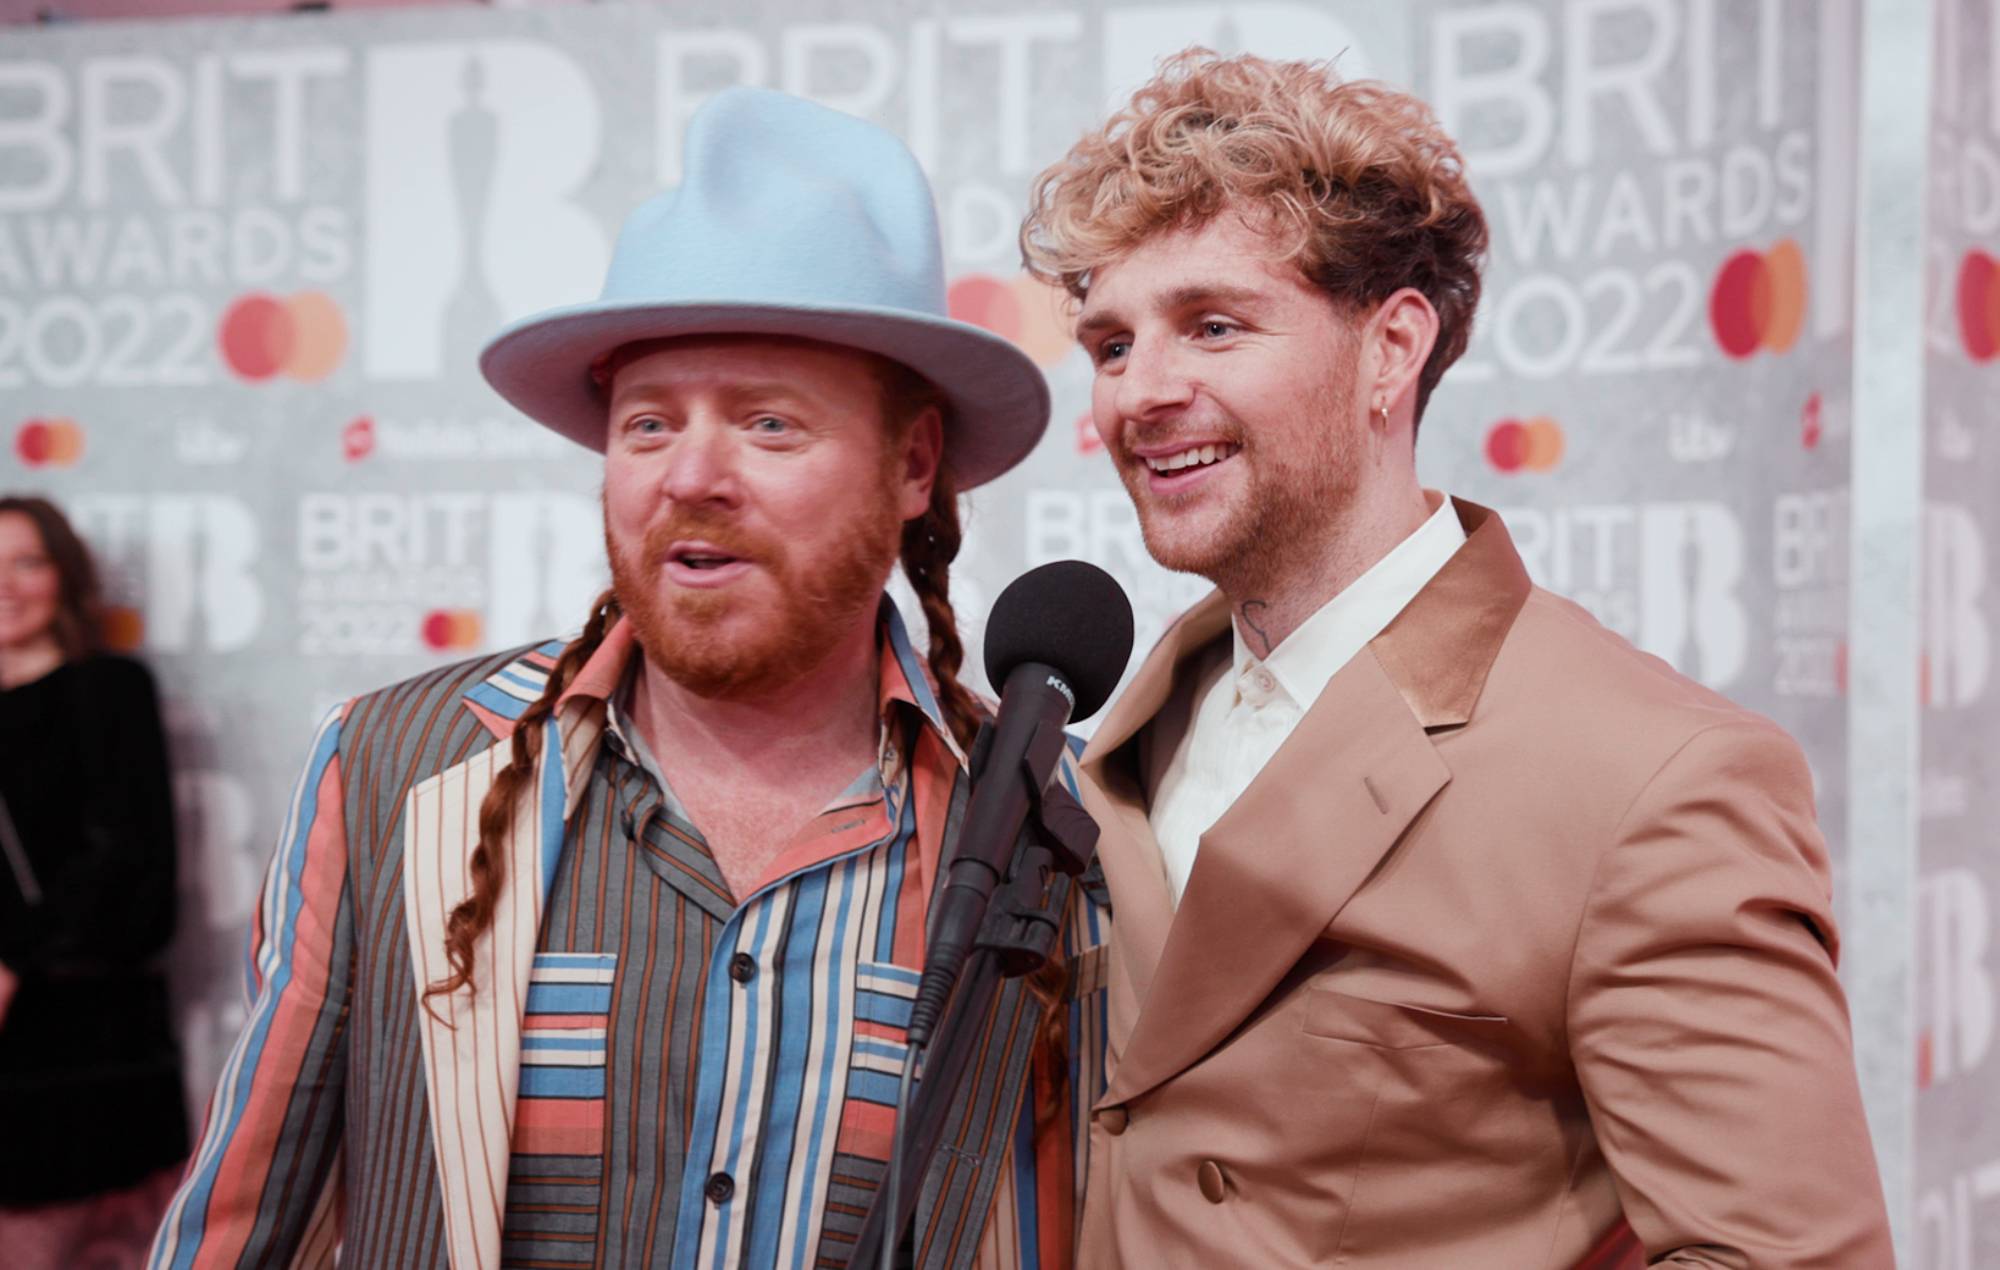 Here’s Keith Lemon rapping for Tom Grennan at the BRIT Awards